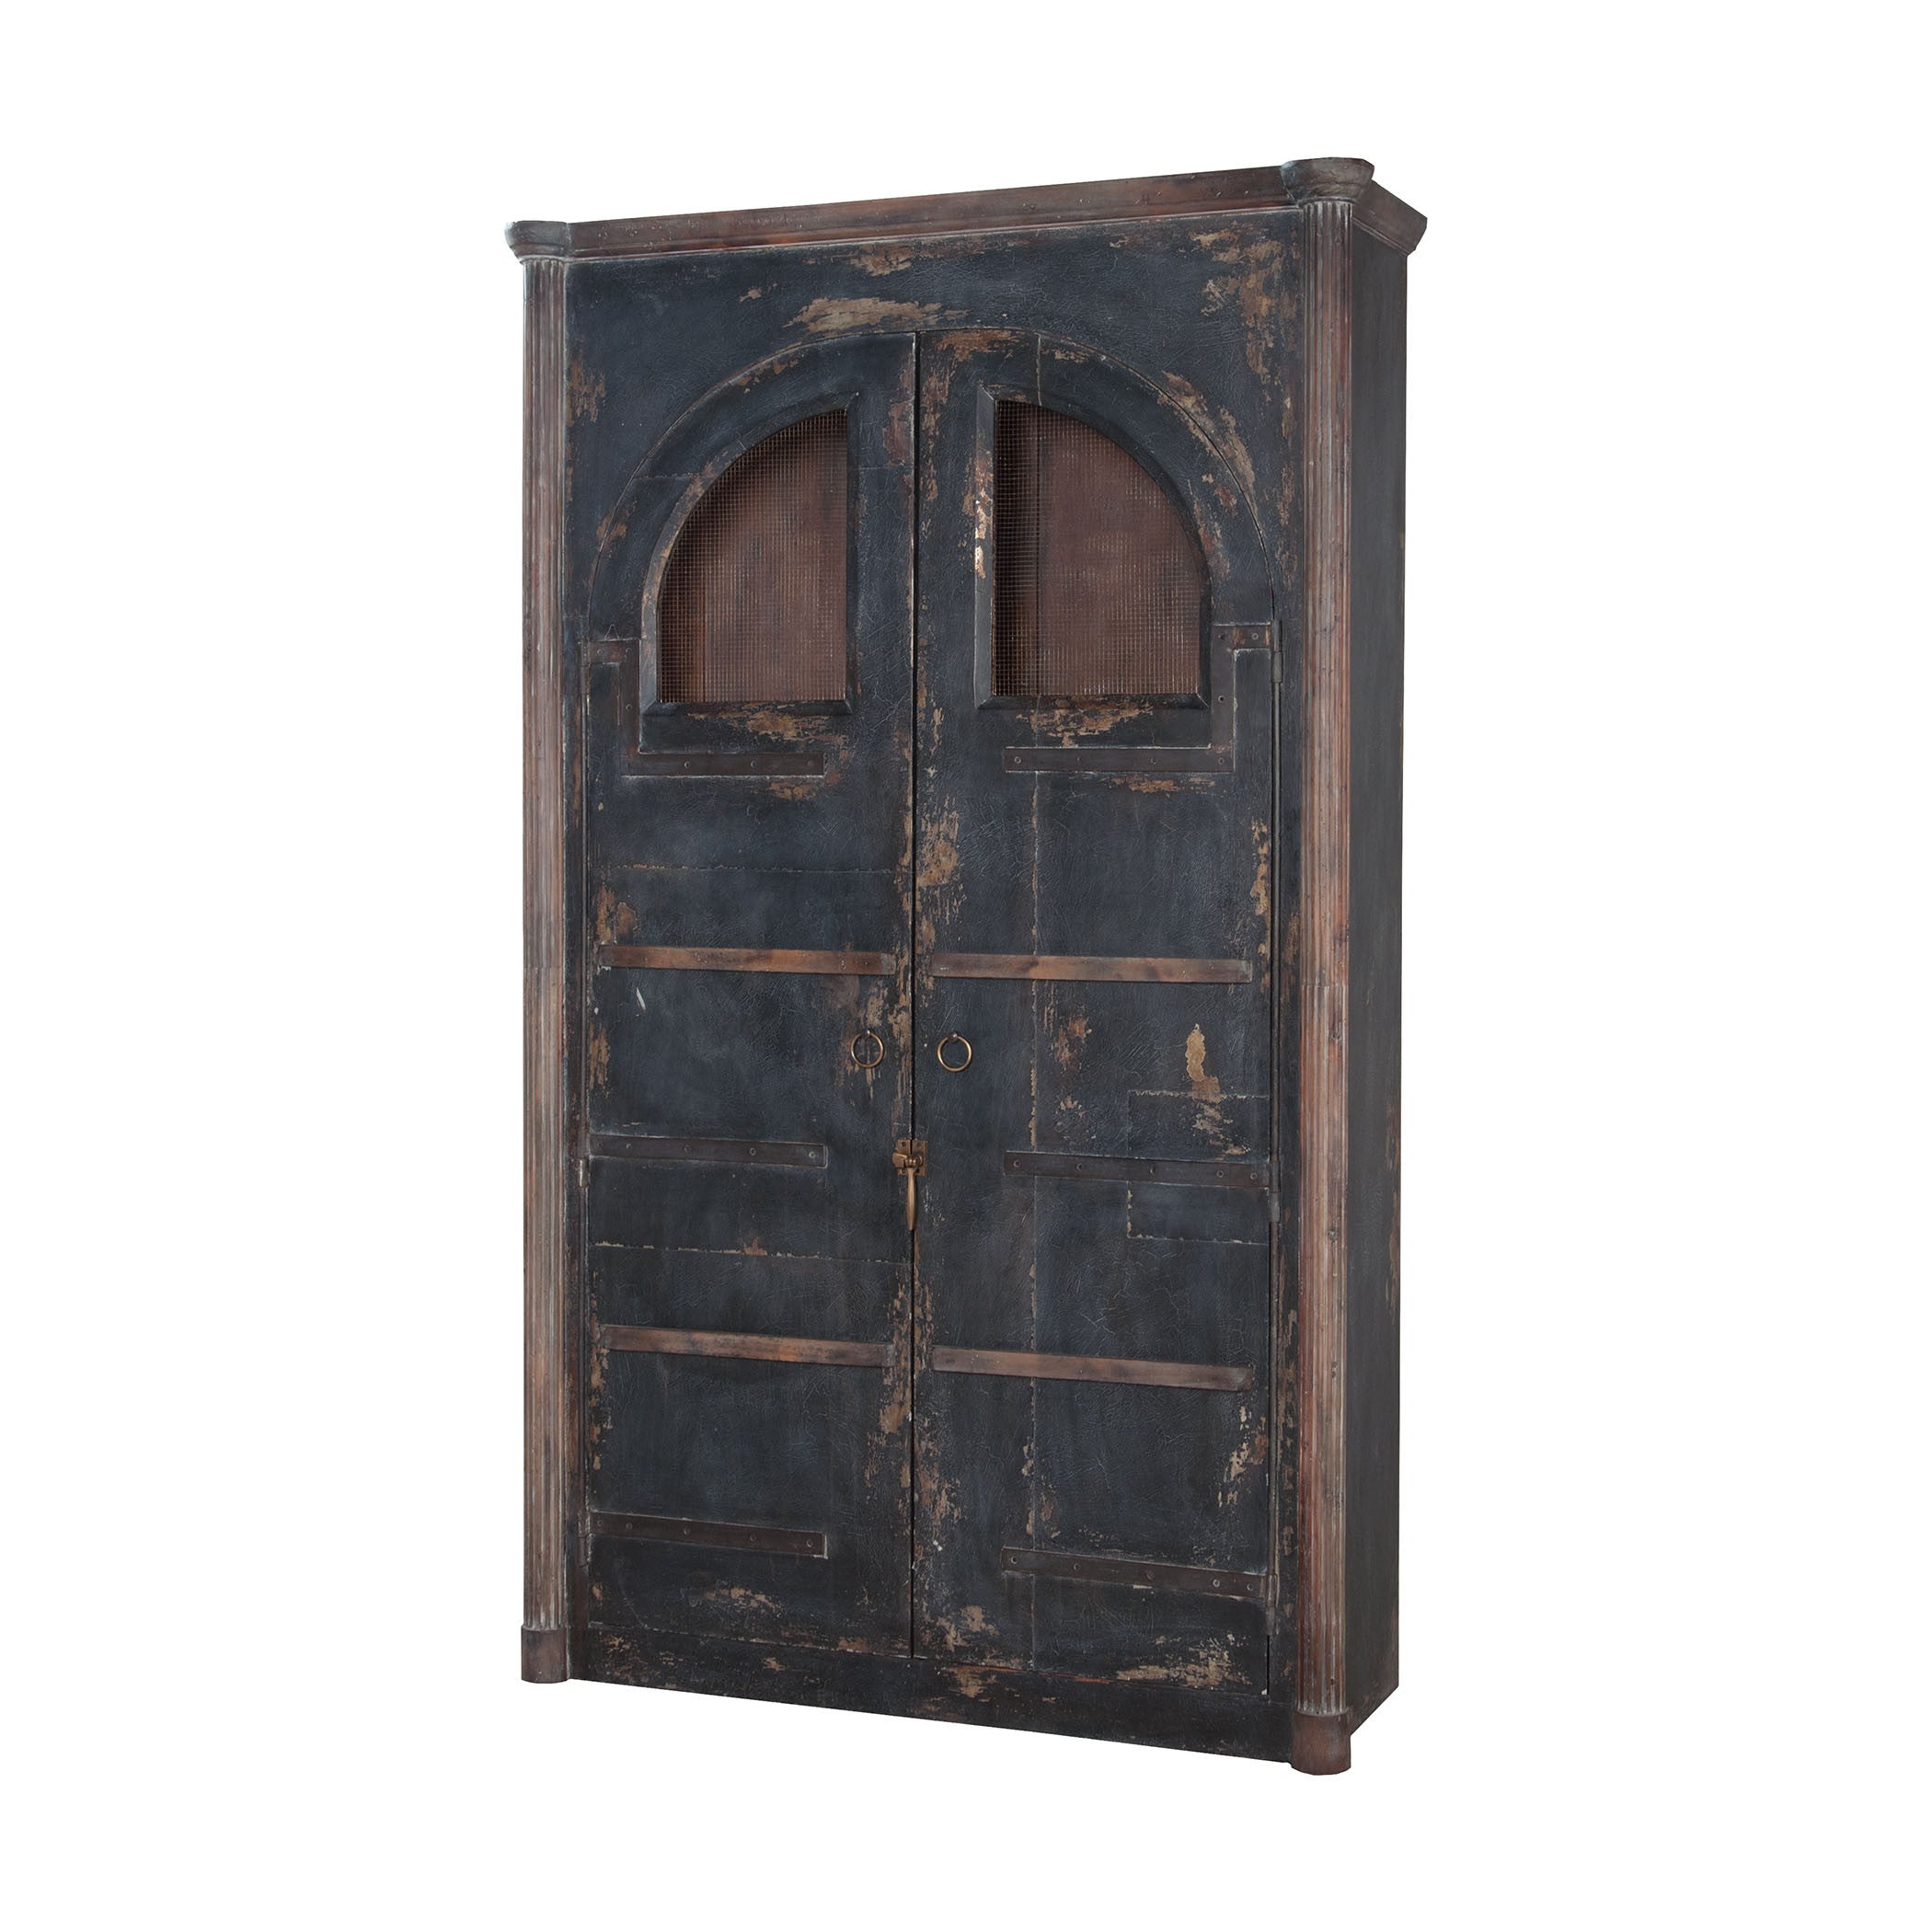 Guildmaster Gui-605032 Farmhouse Collection Natural Aged Stain,vintage Noir Finish Armoire